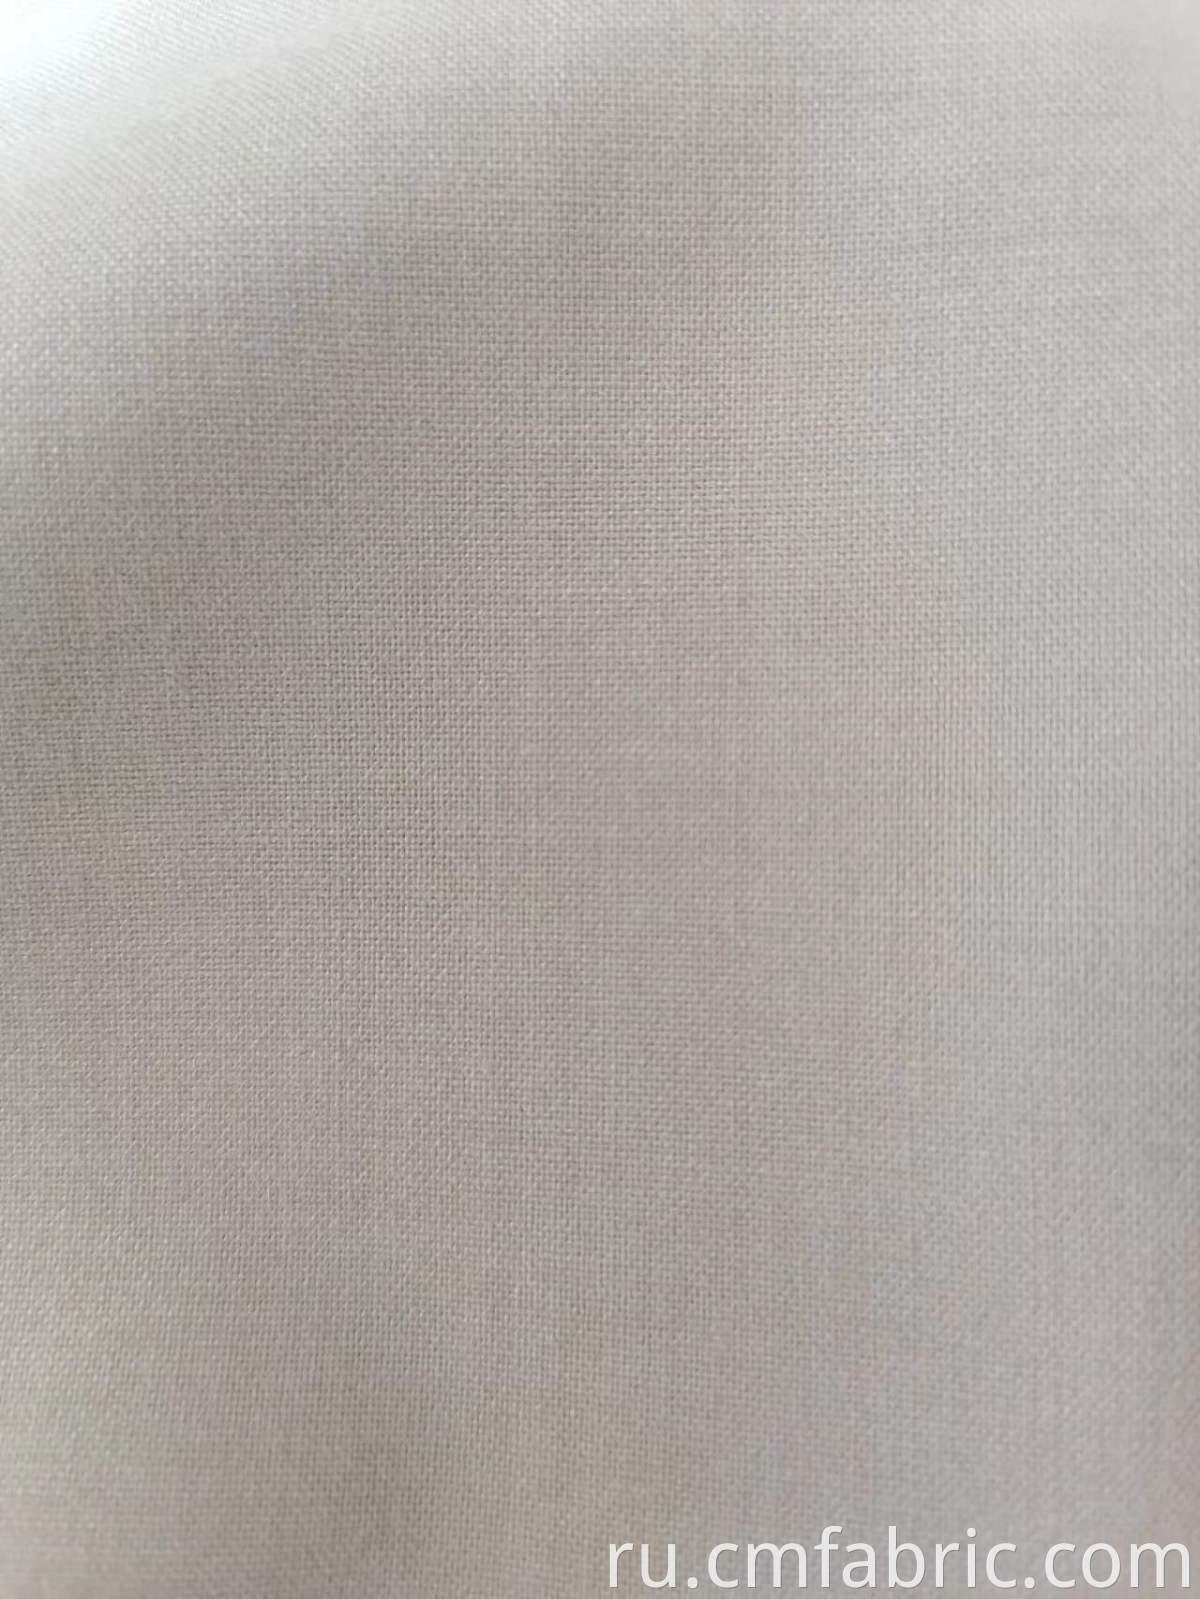 WOVEN POLYESTER RAYON SPANDEX FABRIC